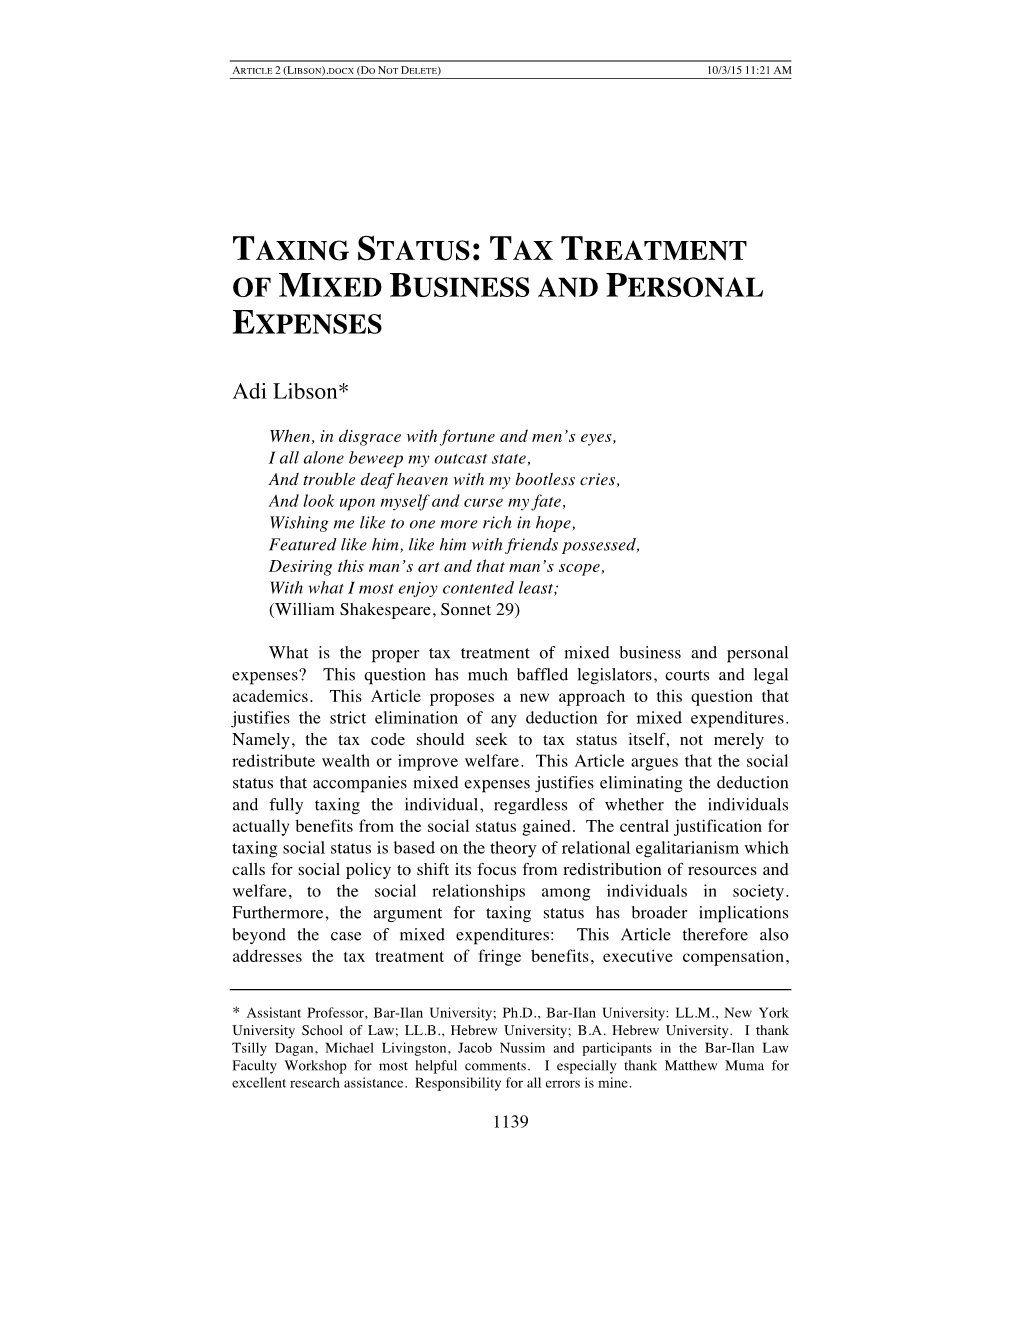 Taxing Status: Tax Treatment of Mixed Business and Personal Expenses